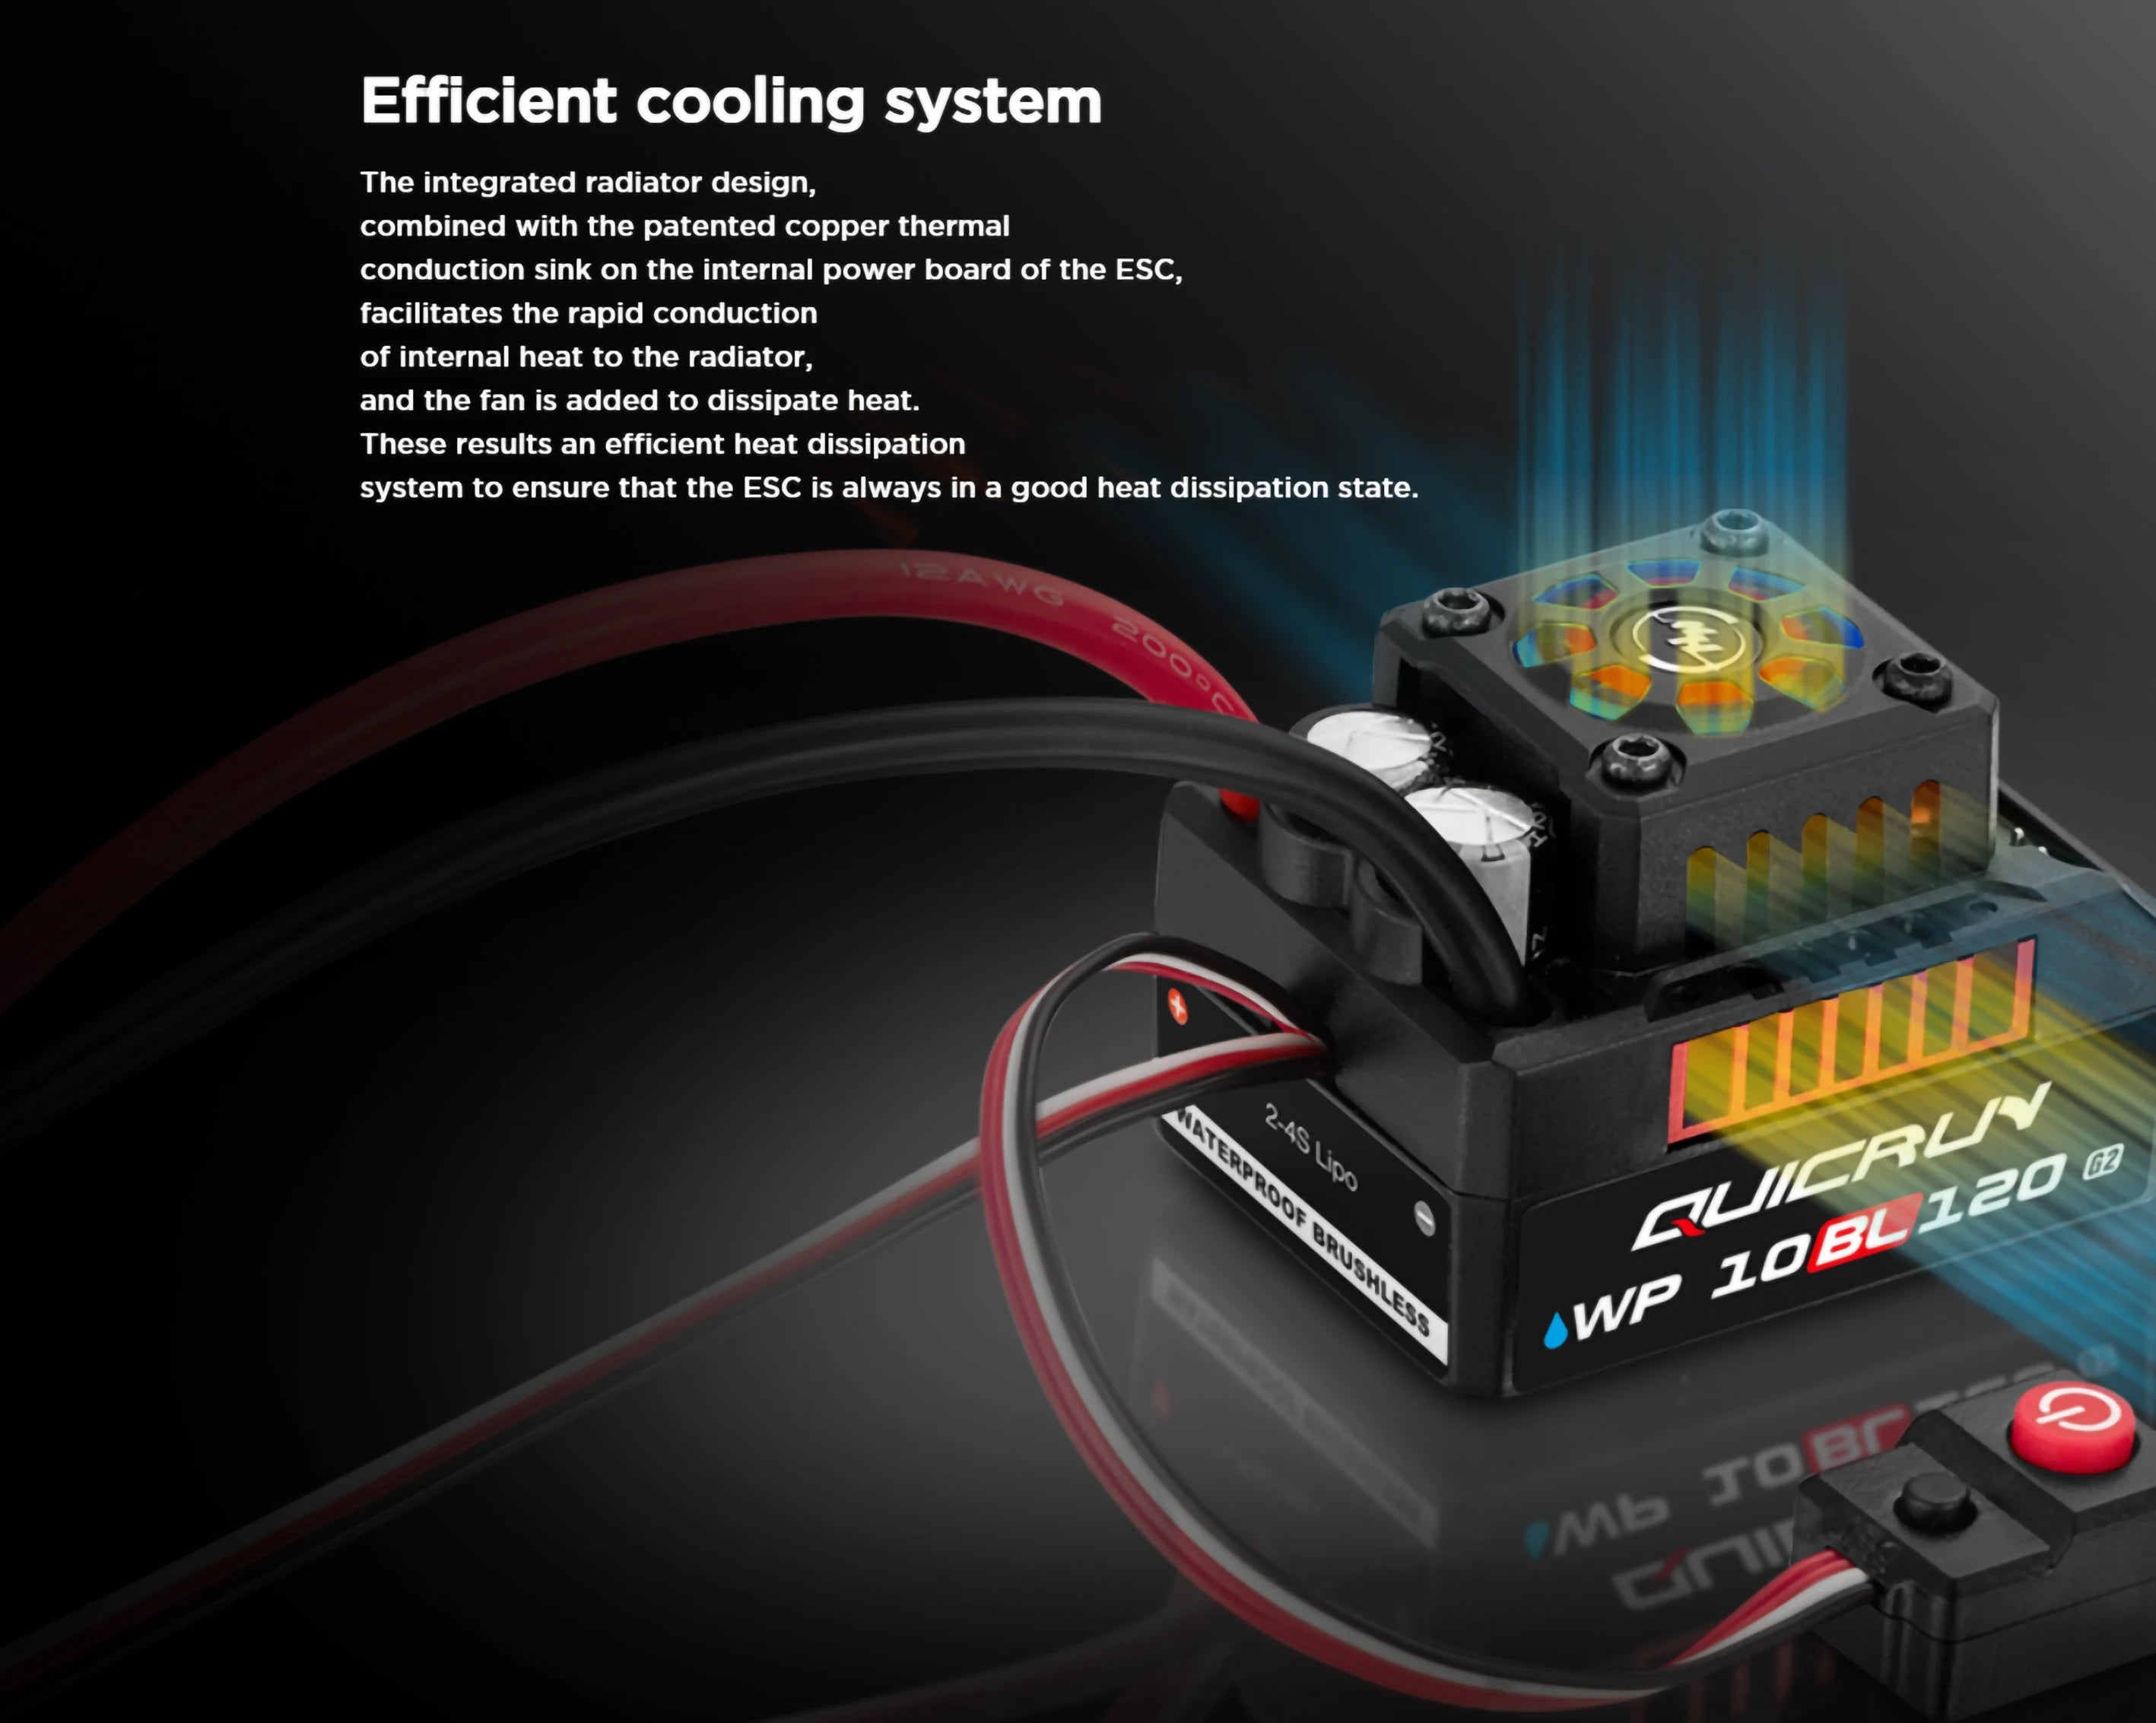 patented copper thermal conduction sink on the internal power board of the ESC facilitates the